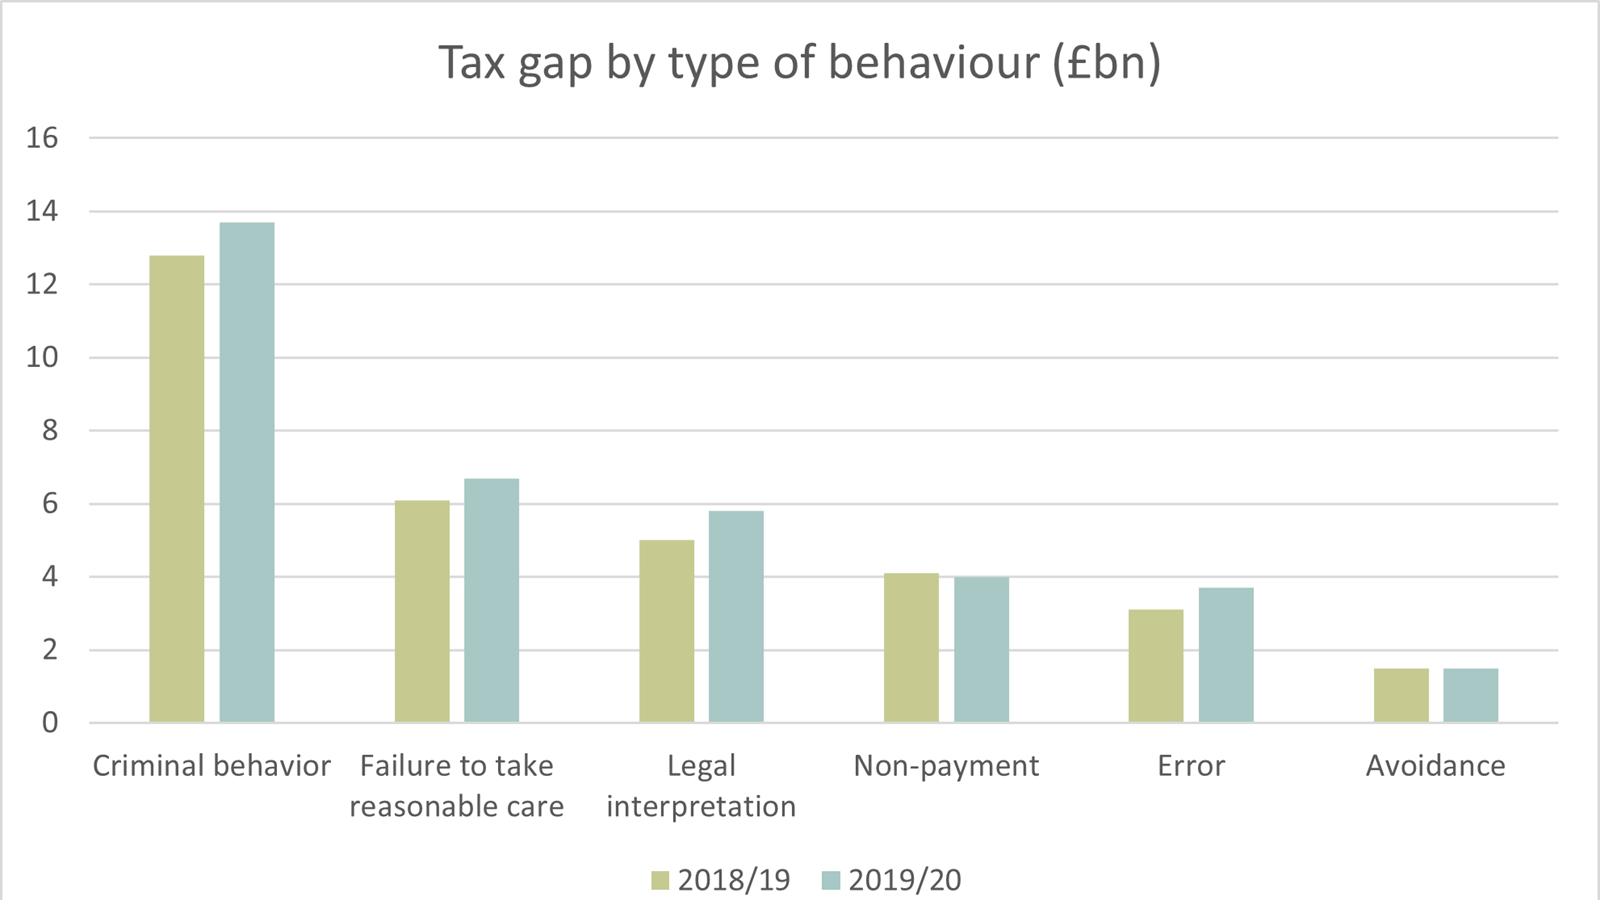 Table showing the tax gap for 2019/20 by type of taxpayer behaviour according to HMRC data.